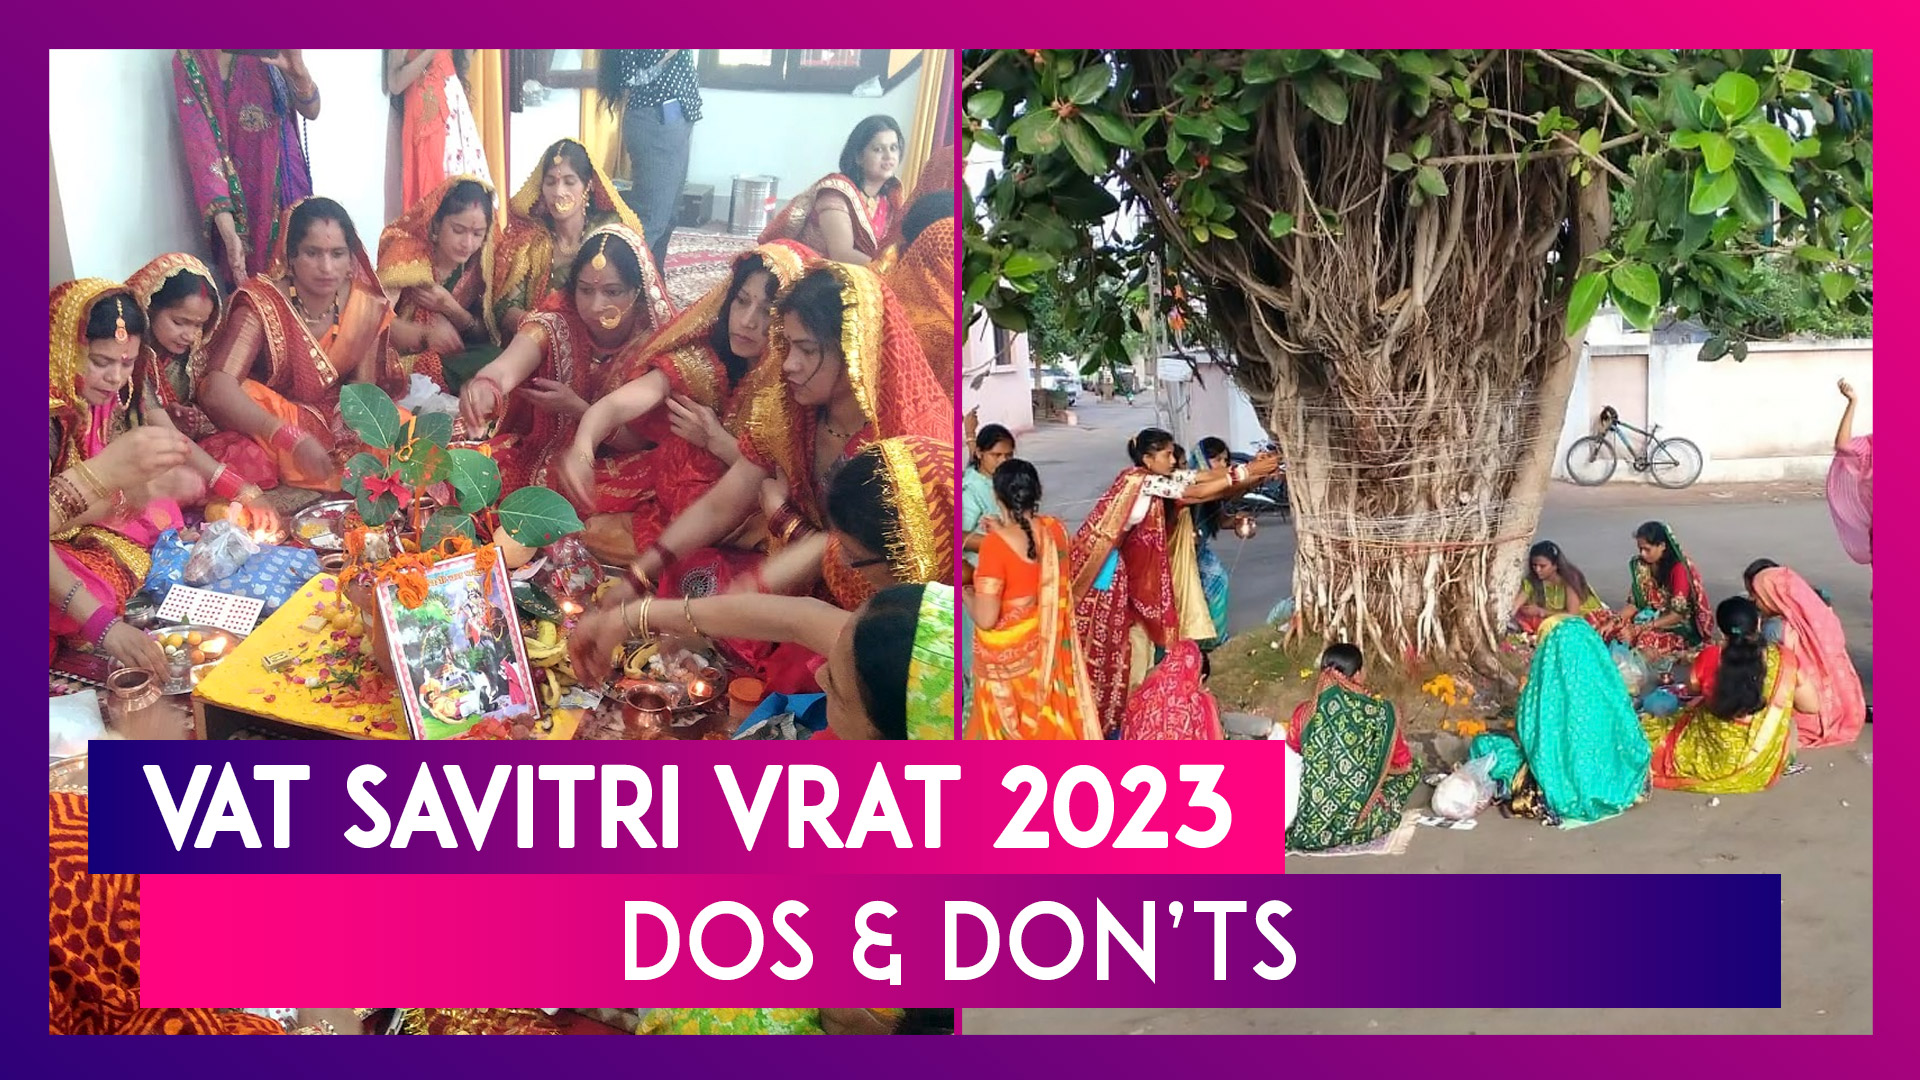 Vat Savitri Vrat 2023: Dos & Don’ts To Be Observed During This Suspicious Fast